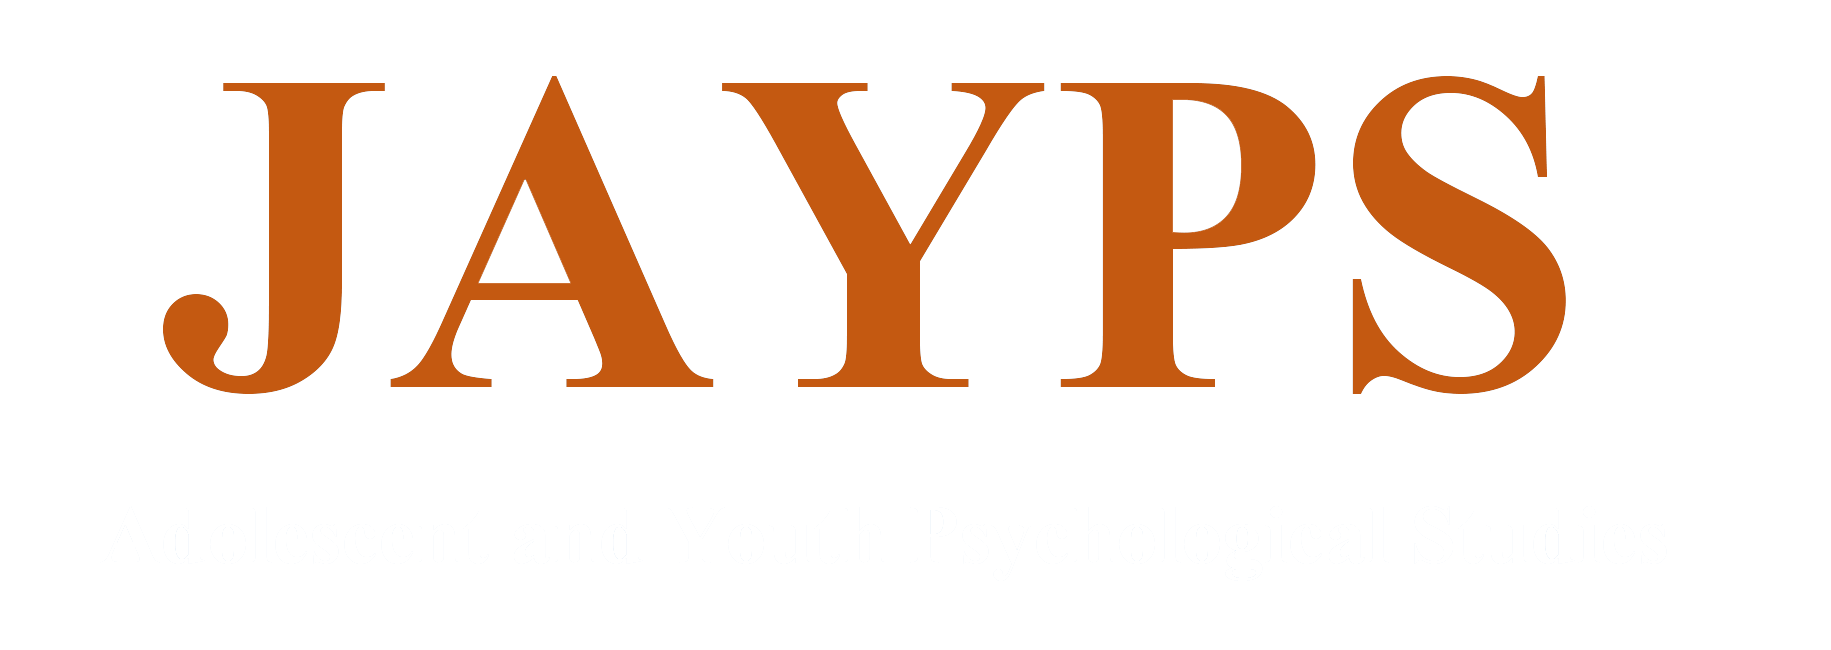 Journal of Adolescent and Youth Psychological Studies (JAYPS)